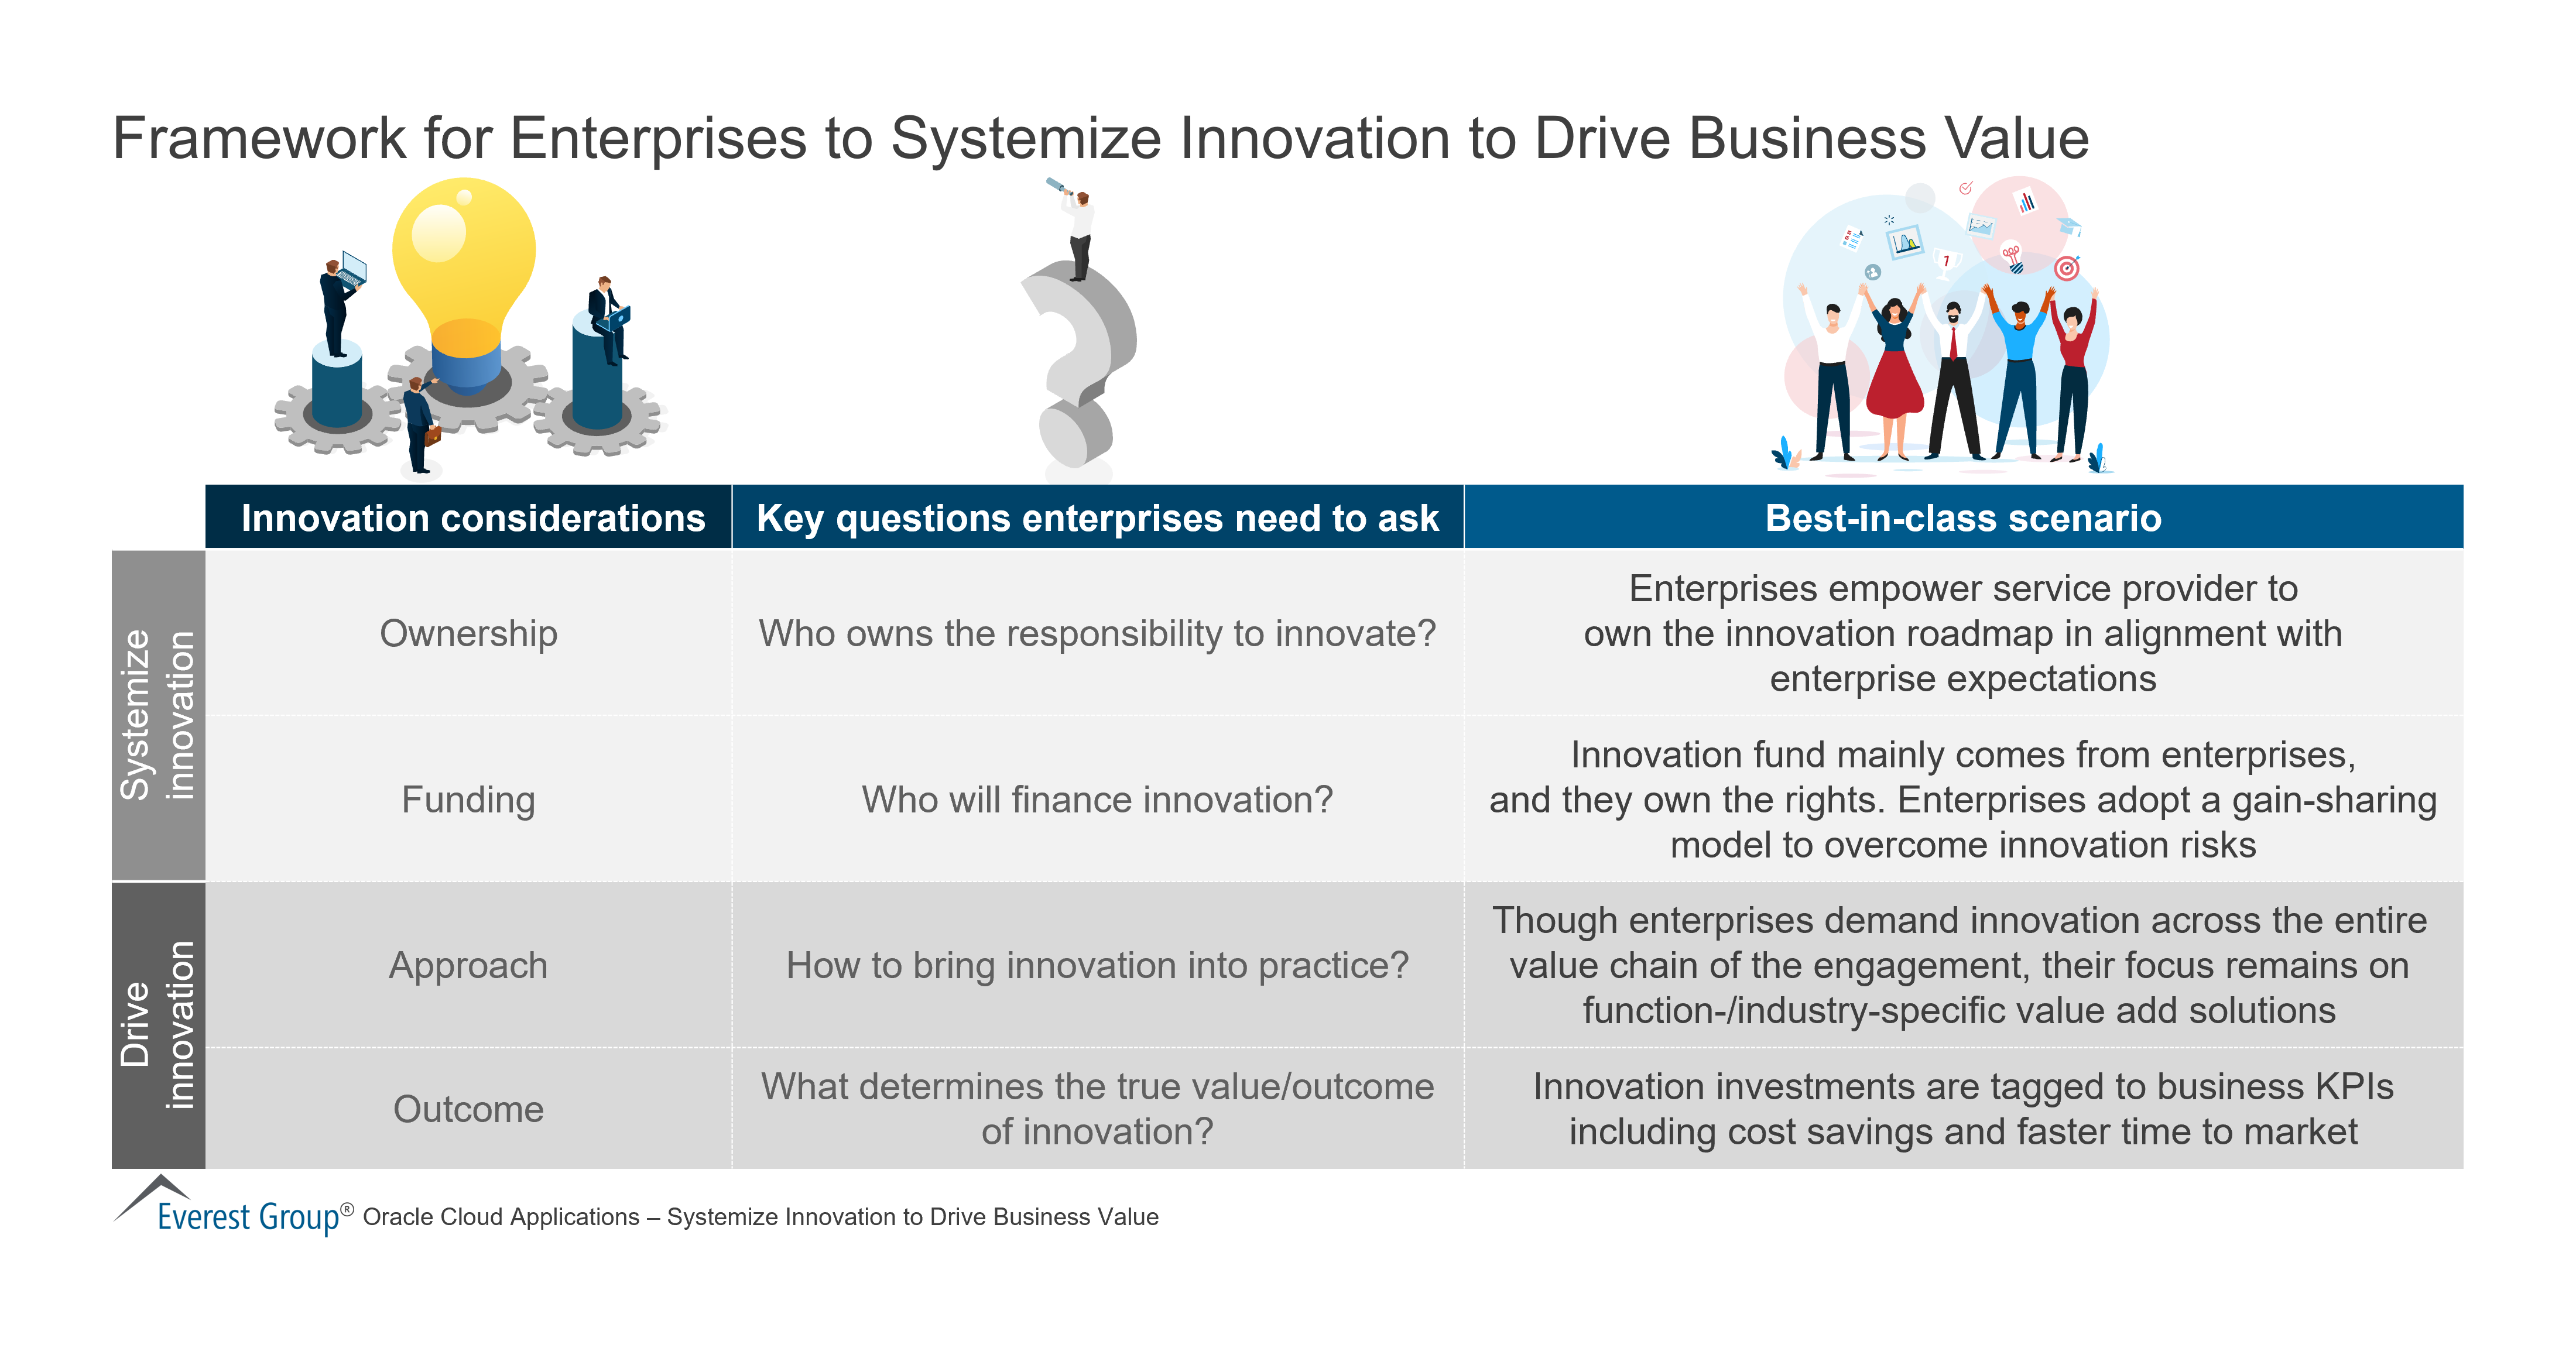 Framework for Enterprises to Systemize Innovation to Drive Business Value